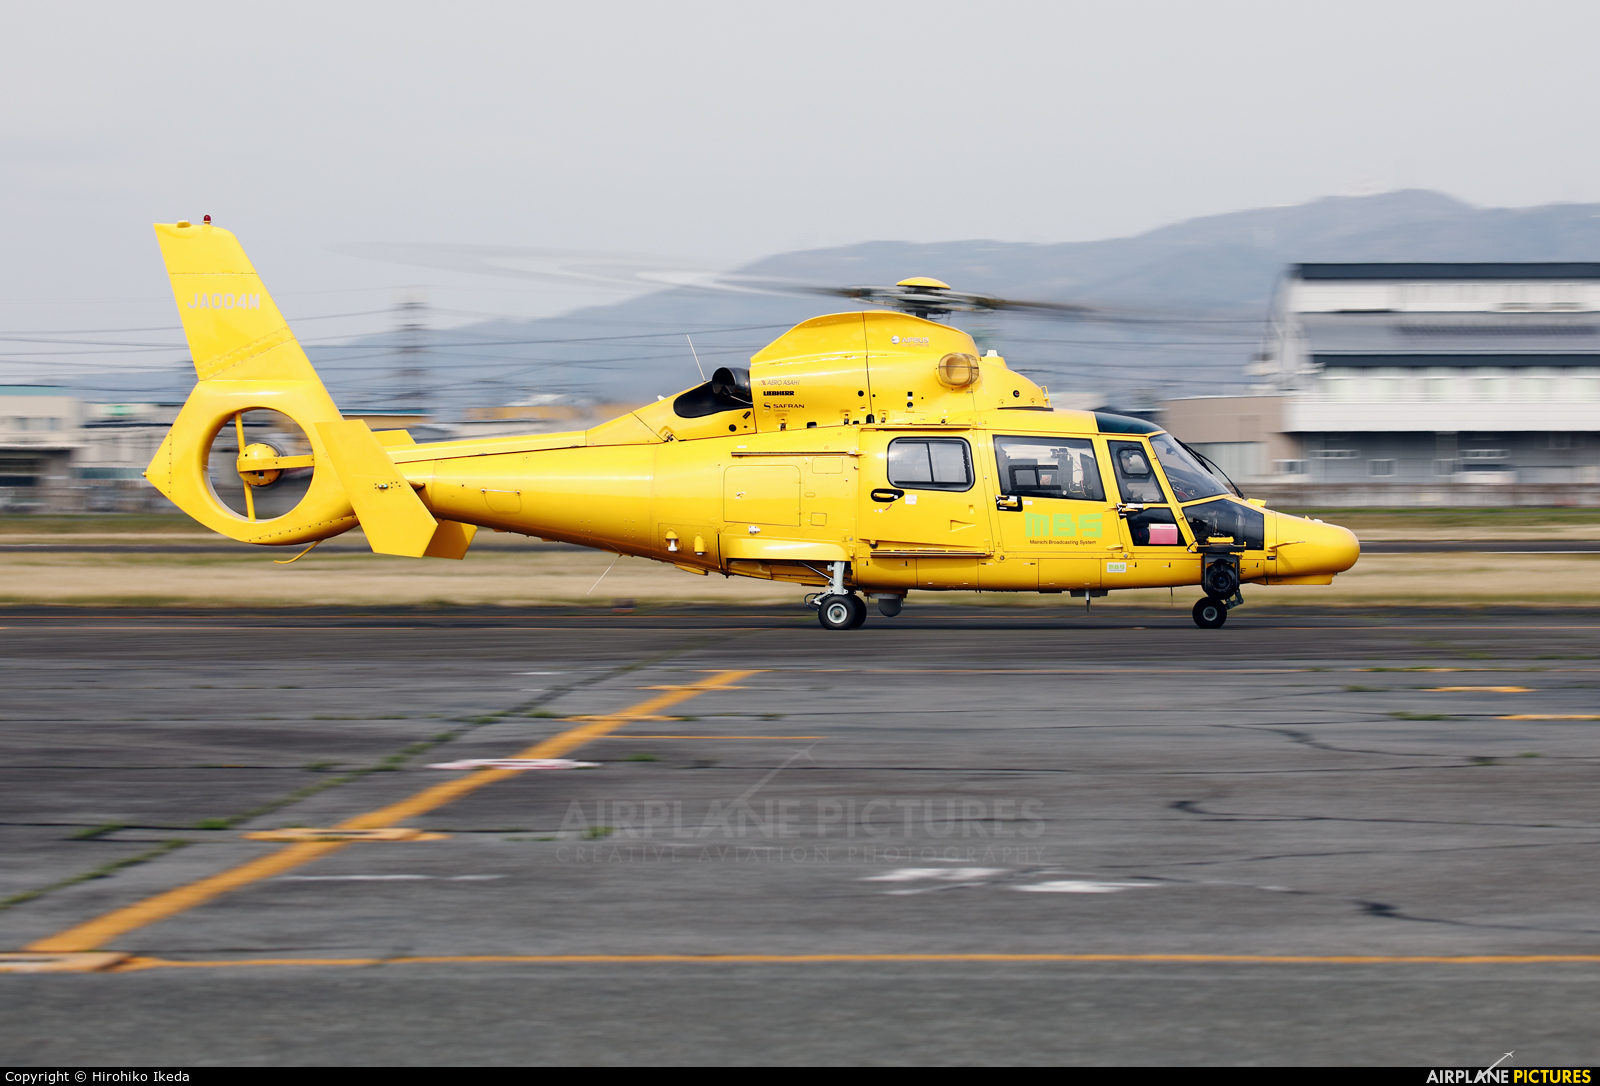 Eurocopter As365 Dauphin Wallpapers